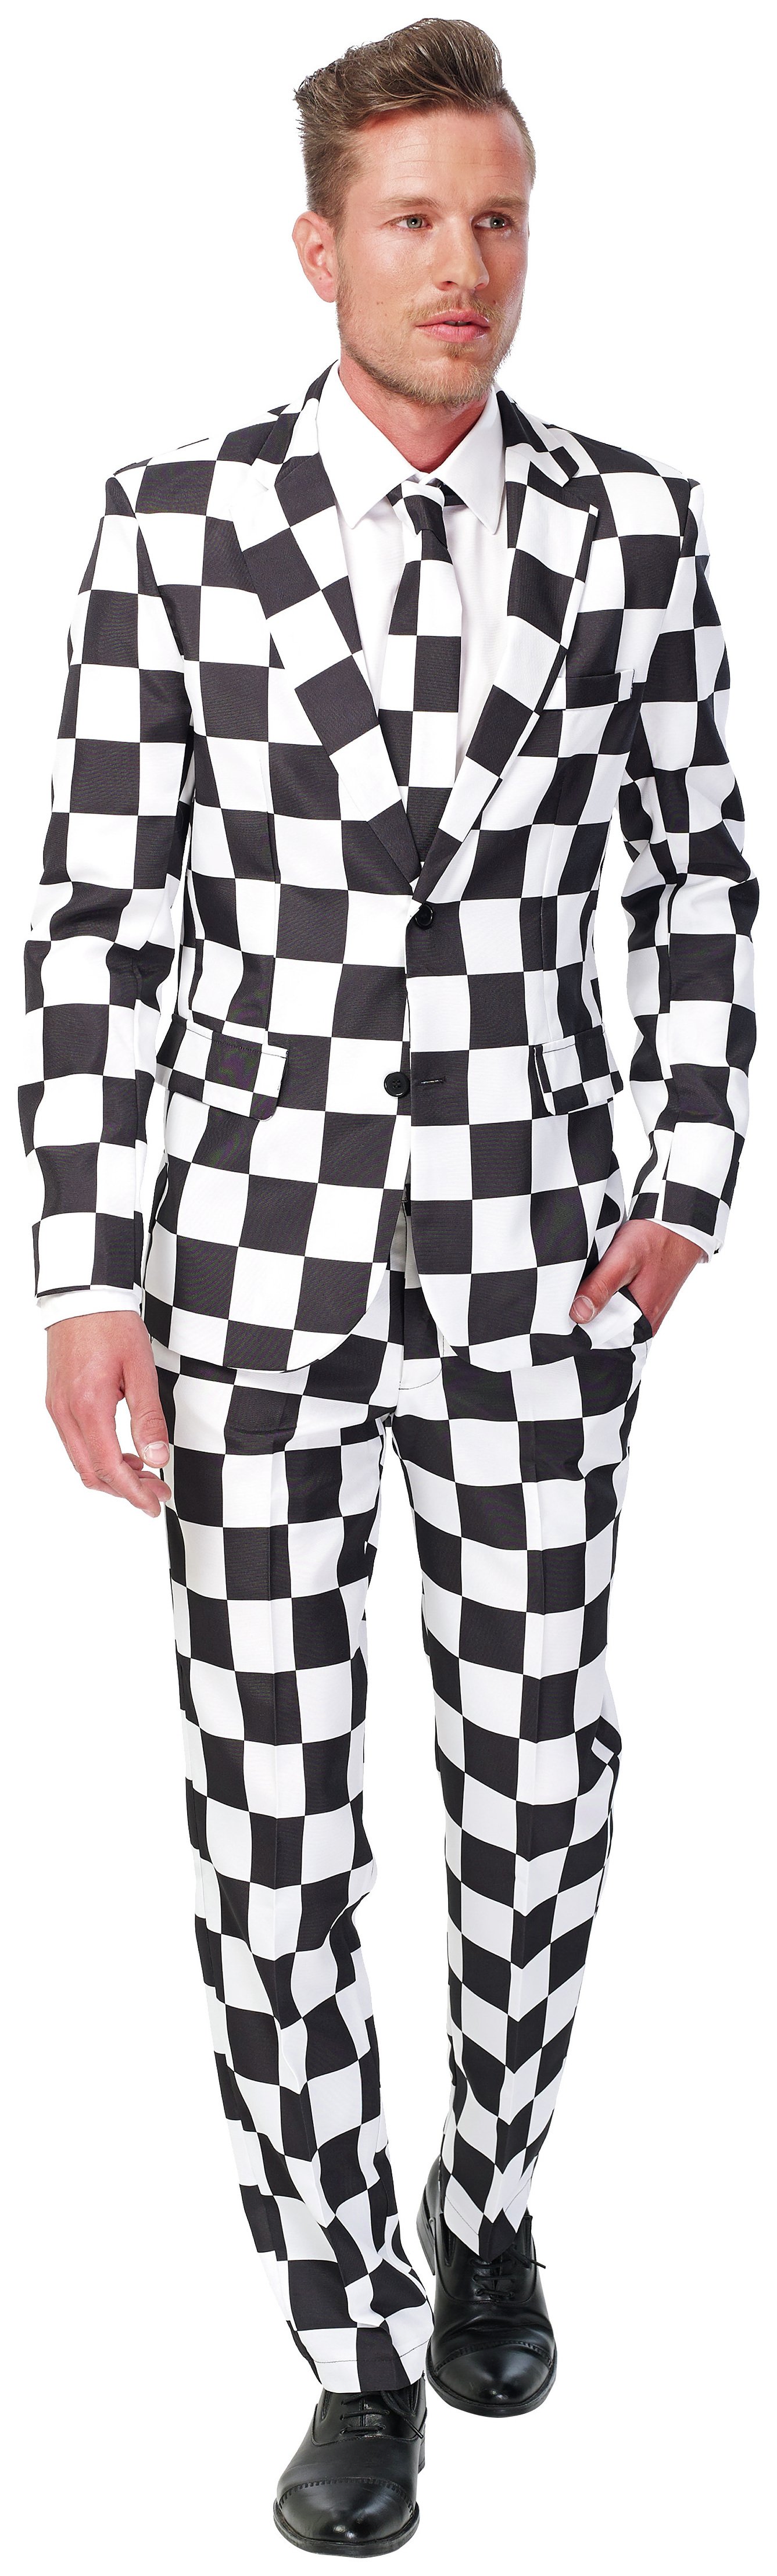 Suitmeister Check Black & White Suit Size S Review